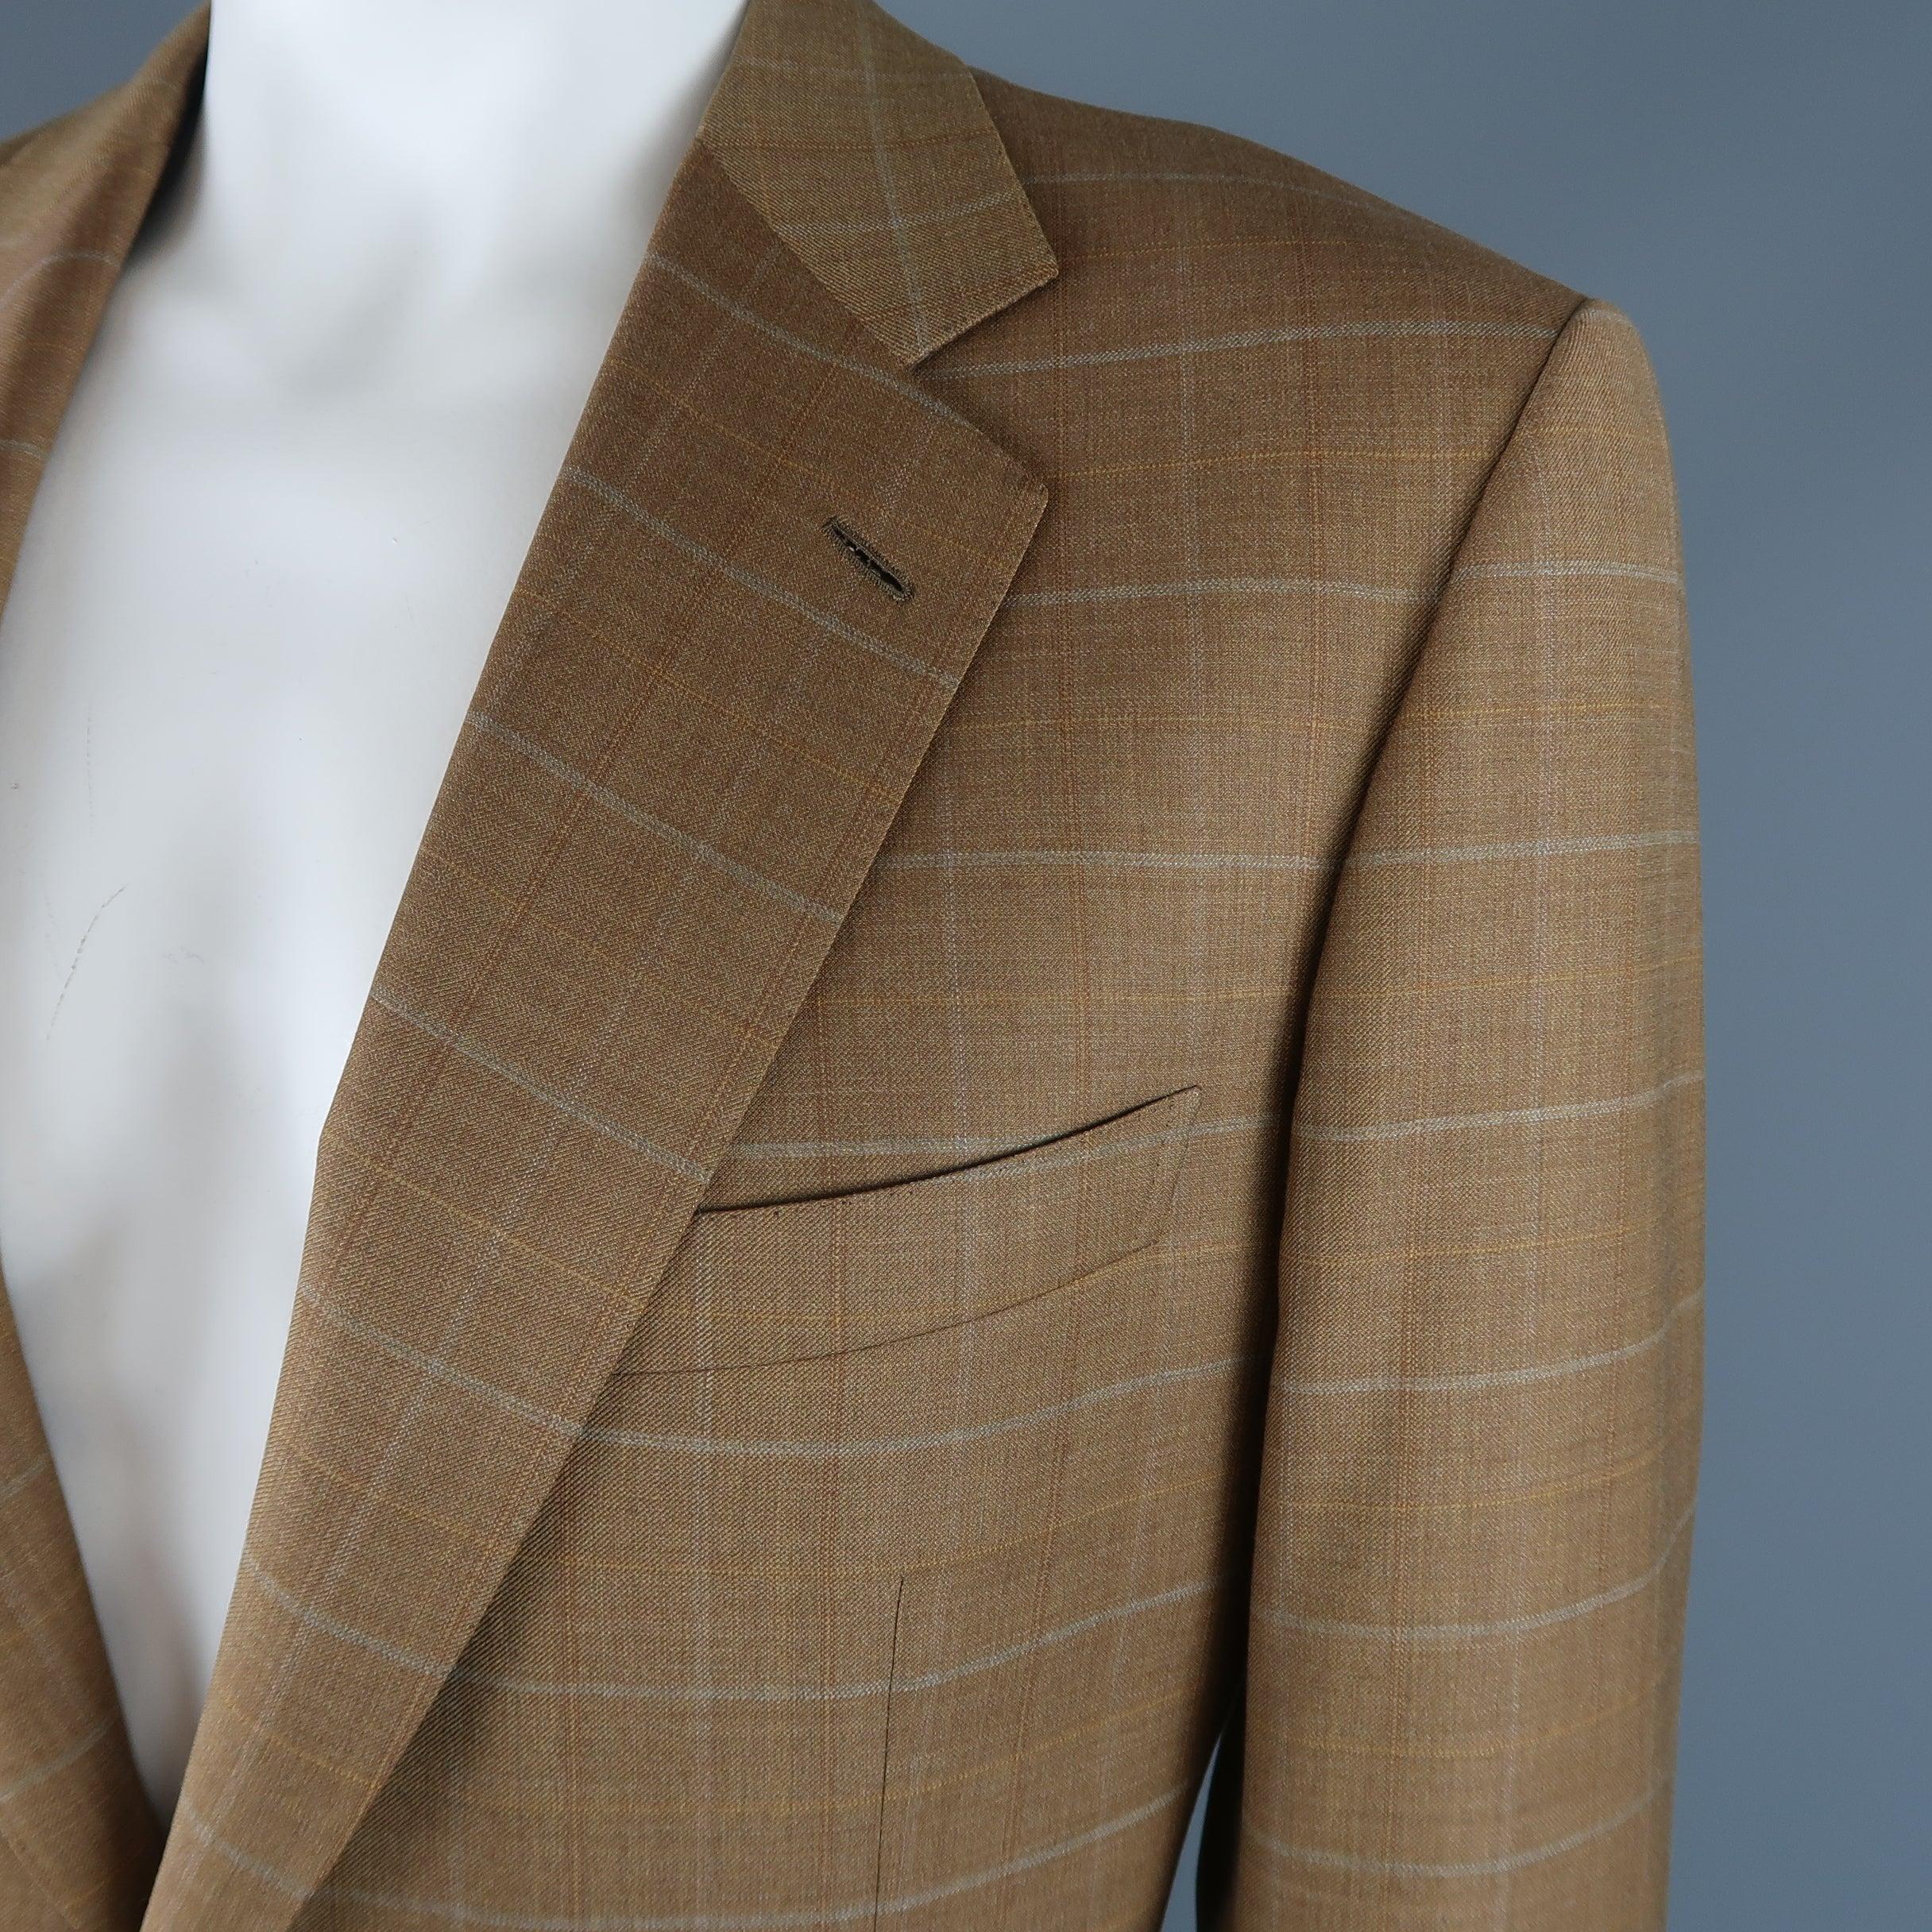 Vintage BRIONI single breasted sport coat comes in golden tan wool with all over window pane pattern and features a wide notch lapel, two button front, flap pockets, and satin liner. Made in Italy.Excellent Pre-Owned Condition. 

Marked:   44